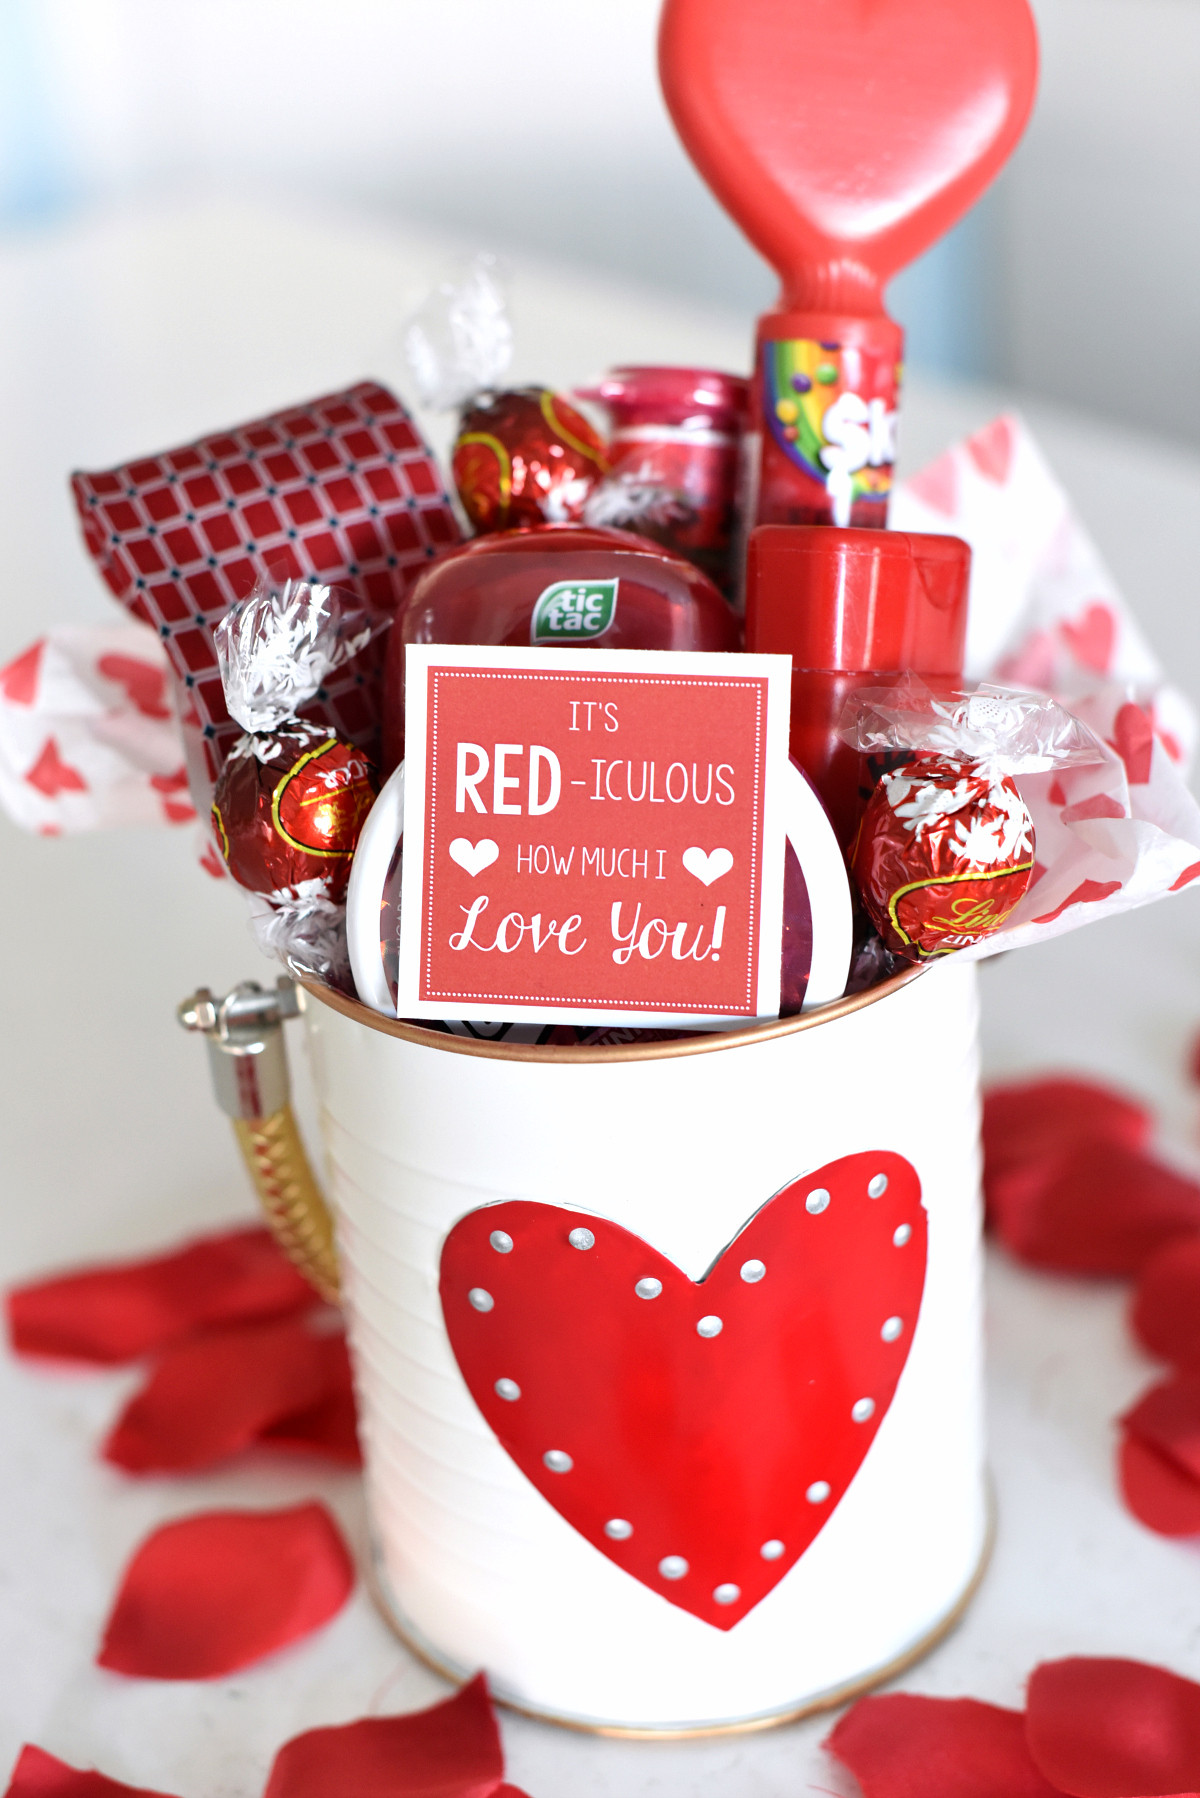 Valentine Gift Ideas For Her Homemade
 25 DIY Valentine s Day Gift Ideas Teens Will Love